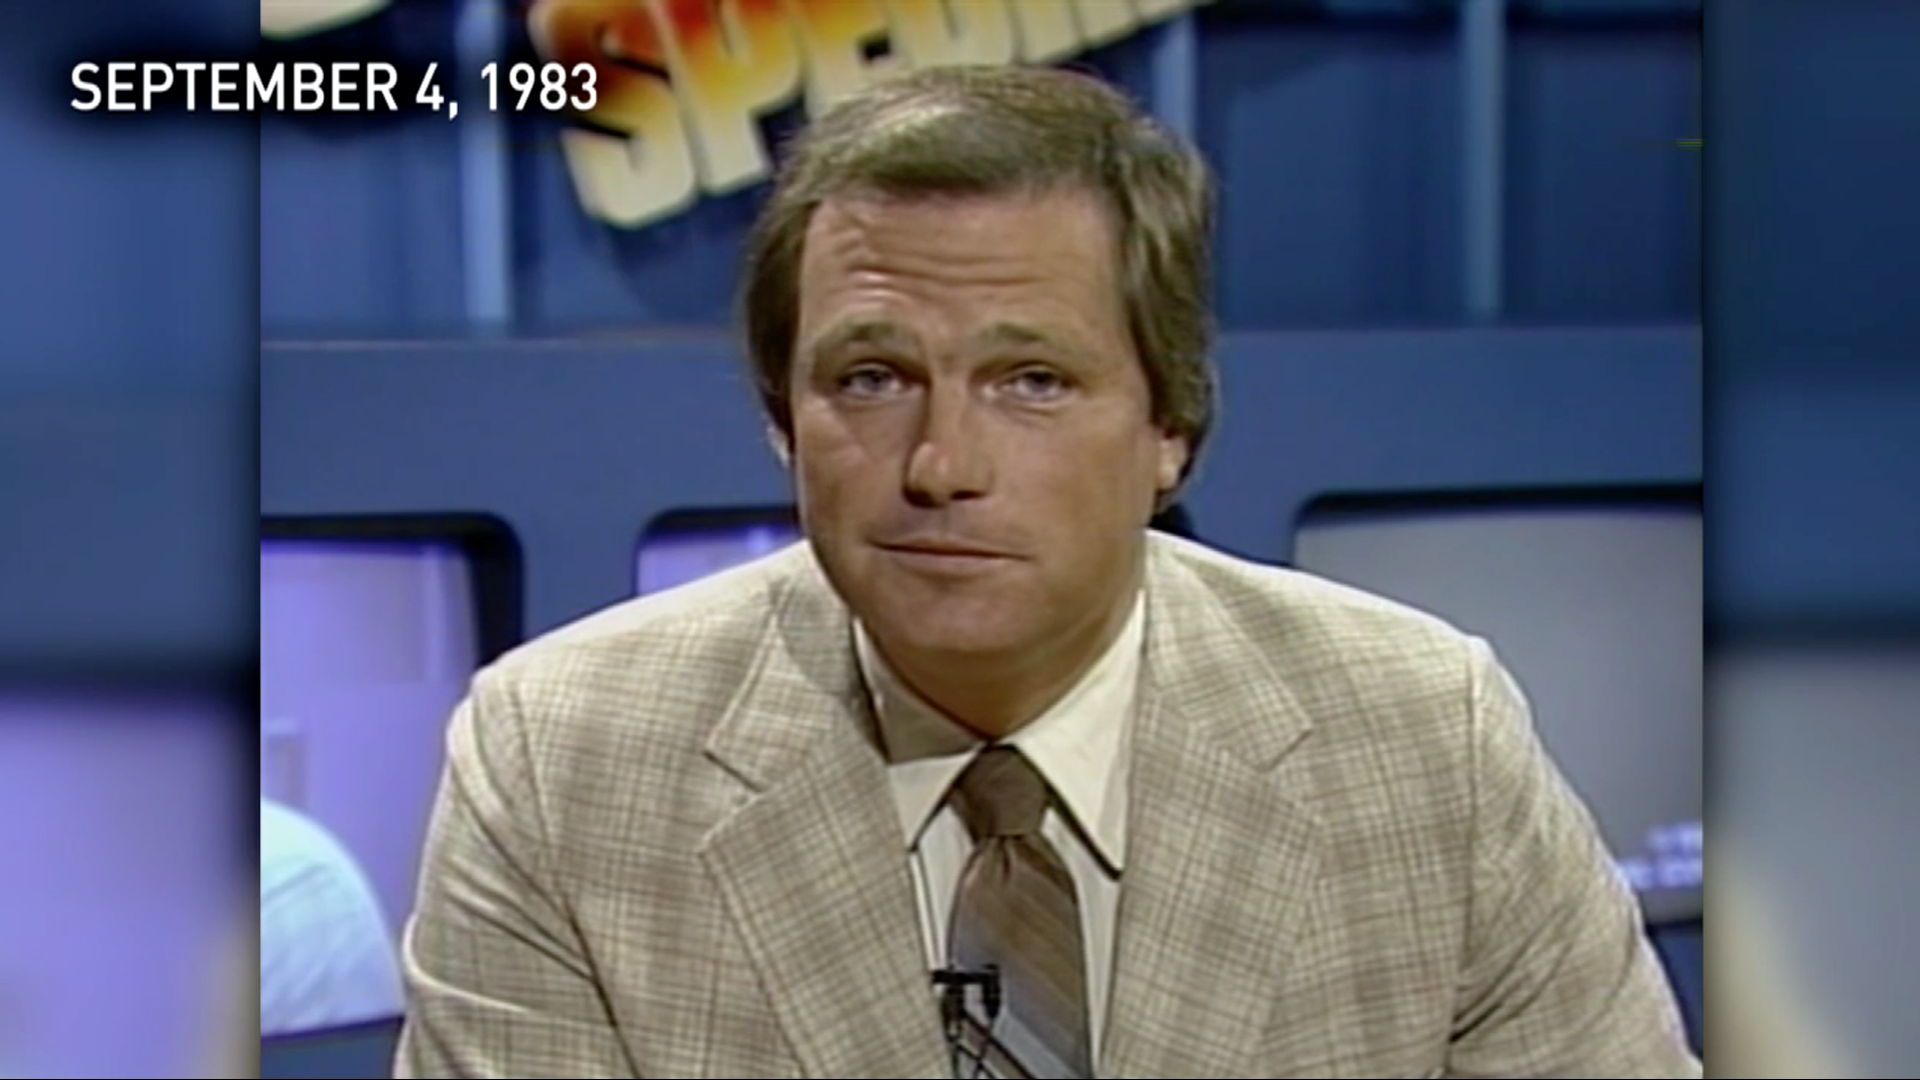 Hansen’s legendary career at WFAA began on March 28, 1983, and just a few months later the station debuted “Dale Hansen’s Sports Special."